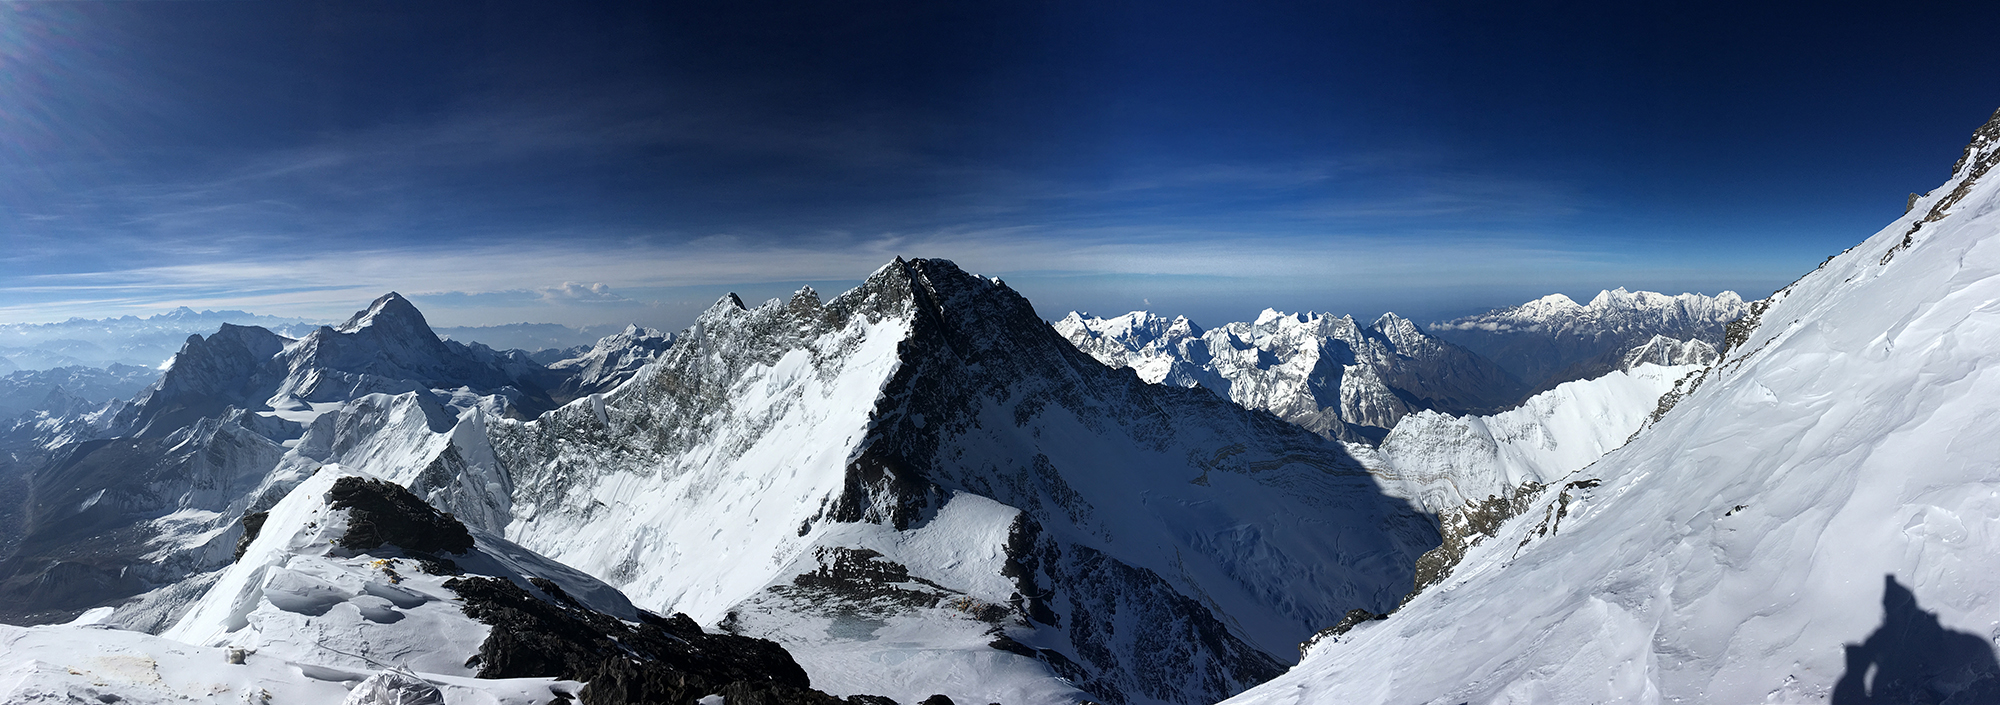 Makalu, left, and Lhotse, center, as seen from the South Summit of Mount Everest. 